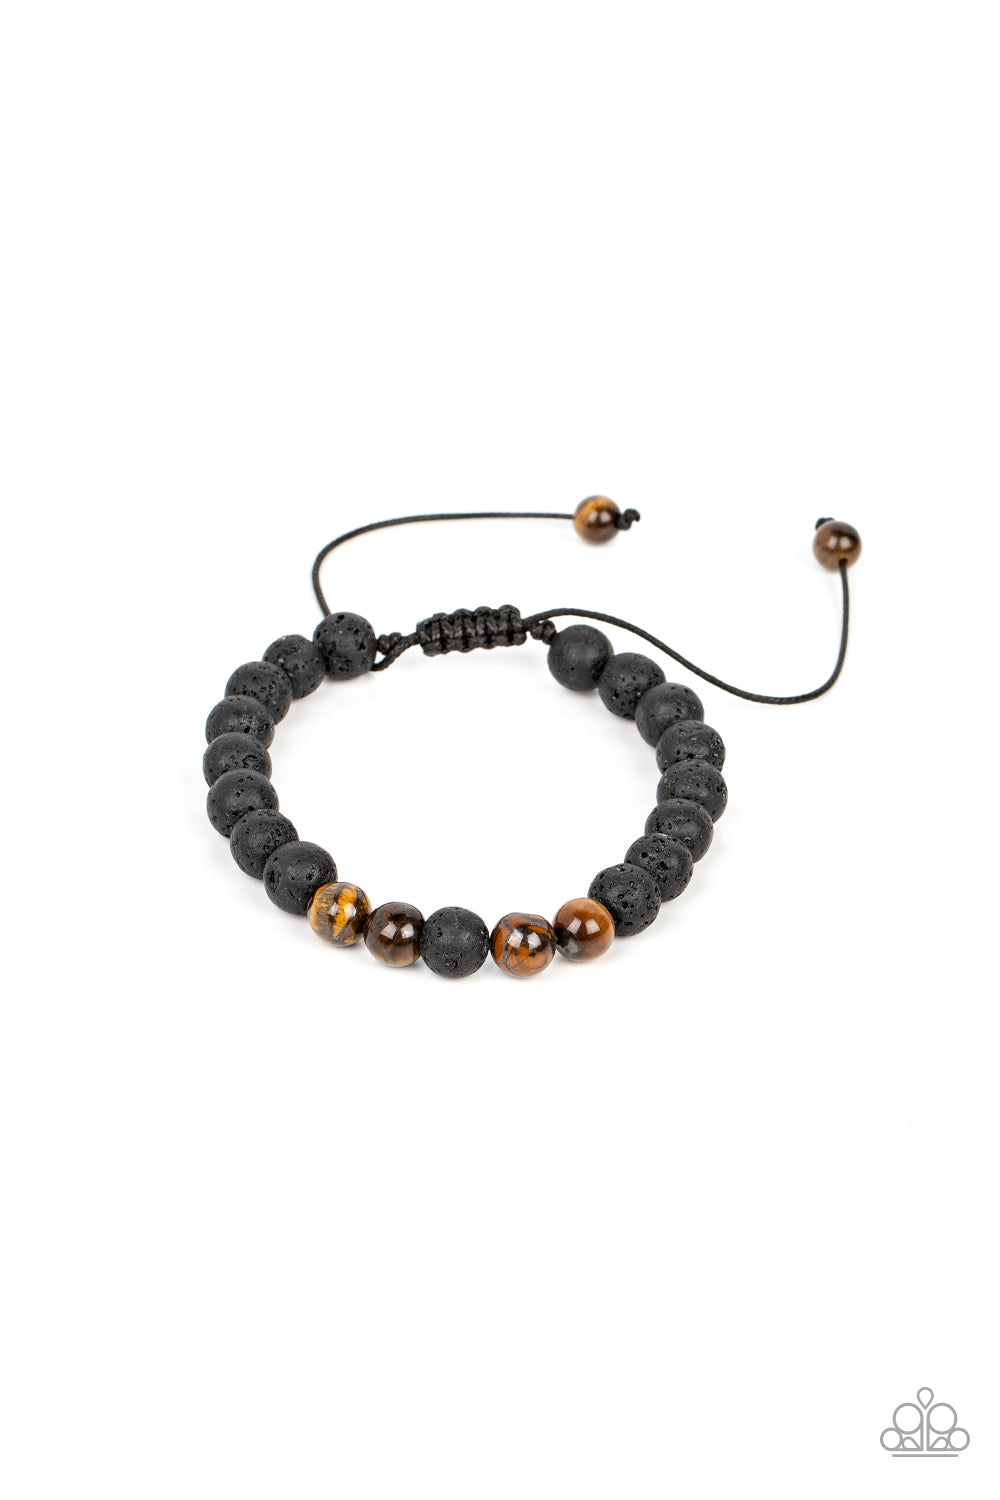 An earthy collection of black lava rock and tiger's eye stone beads are threaded along a black cord around the wrist, resulting in a seasonal pop of color.